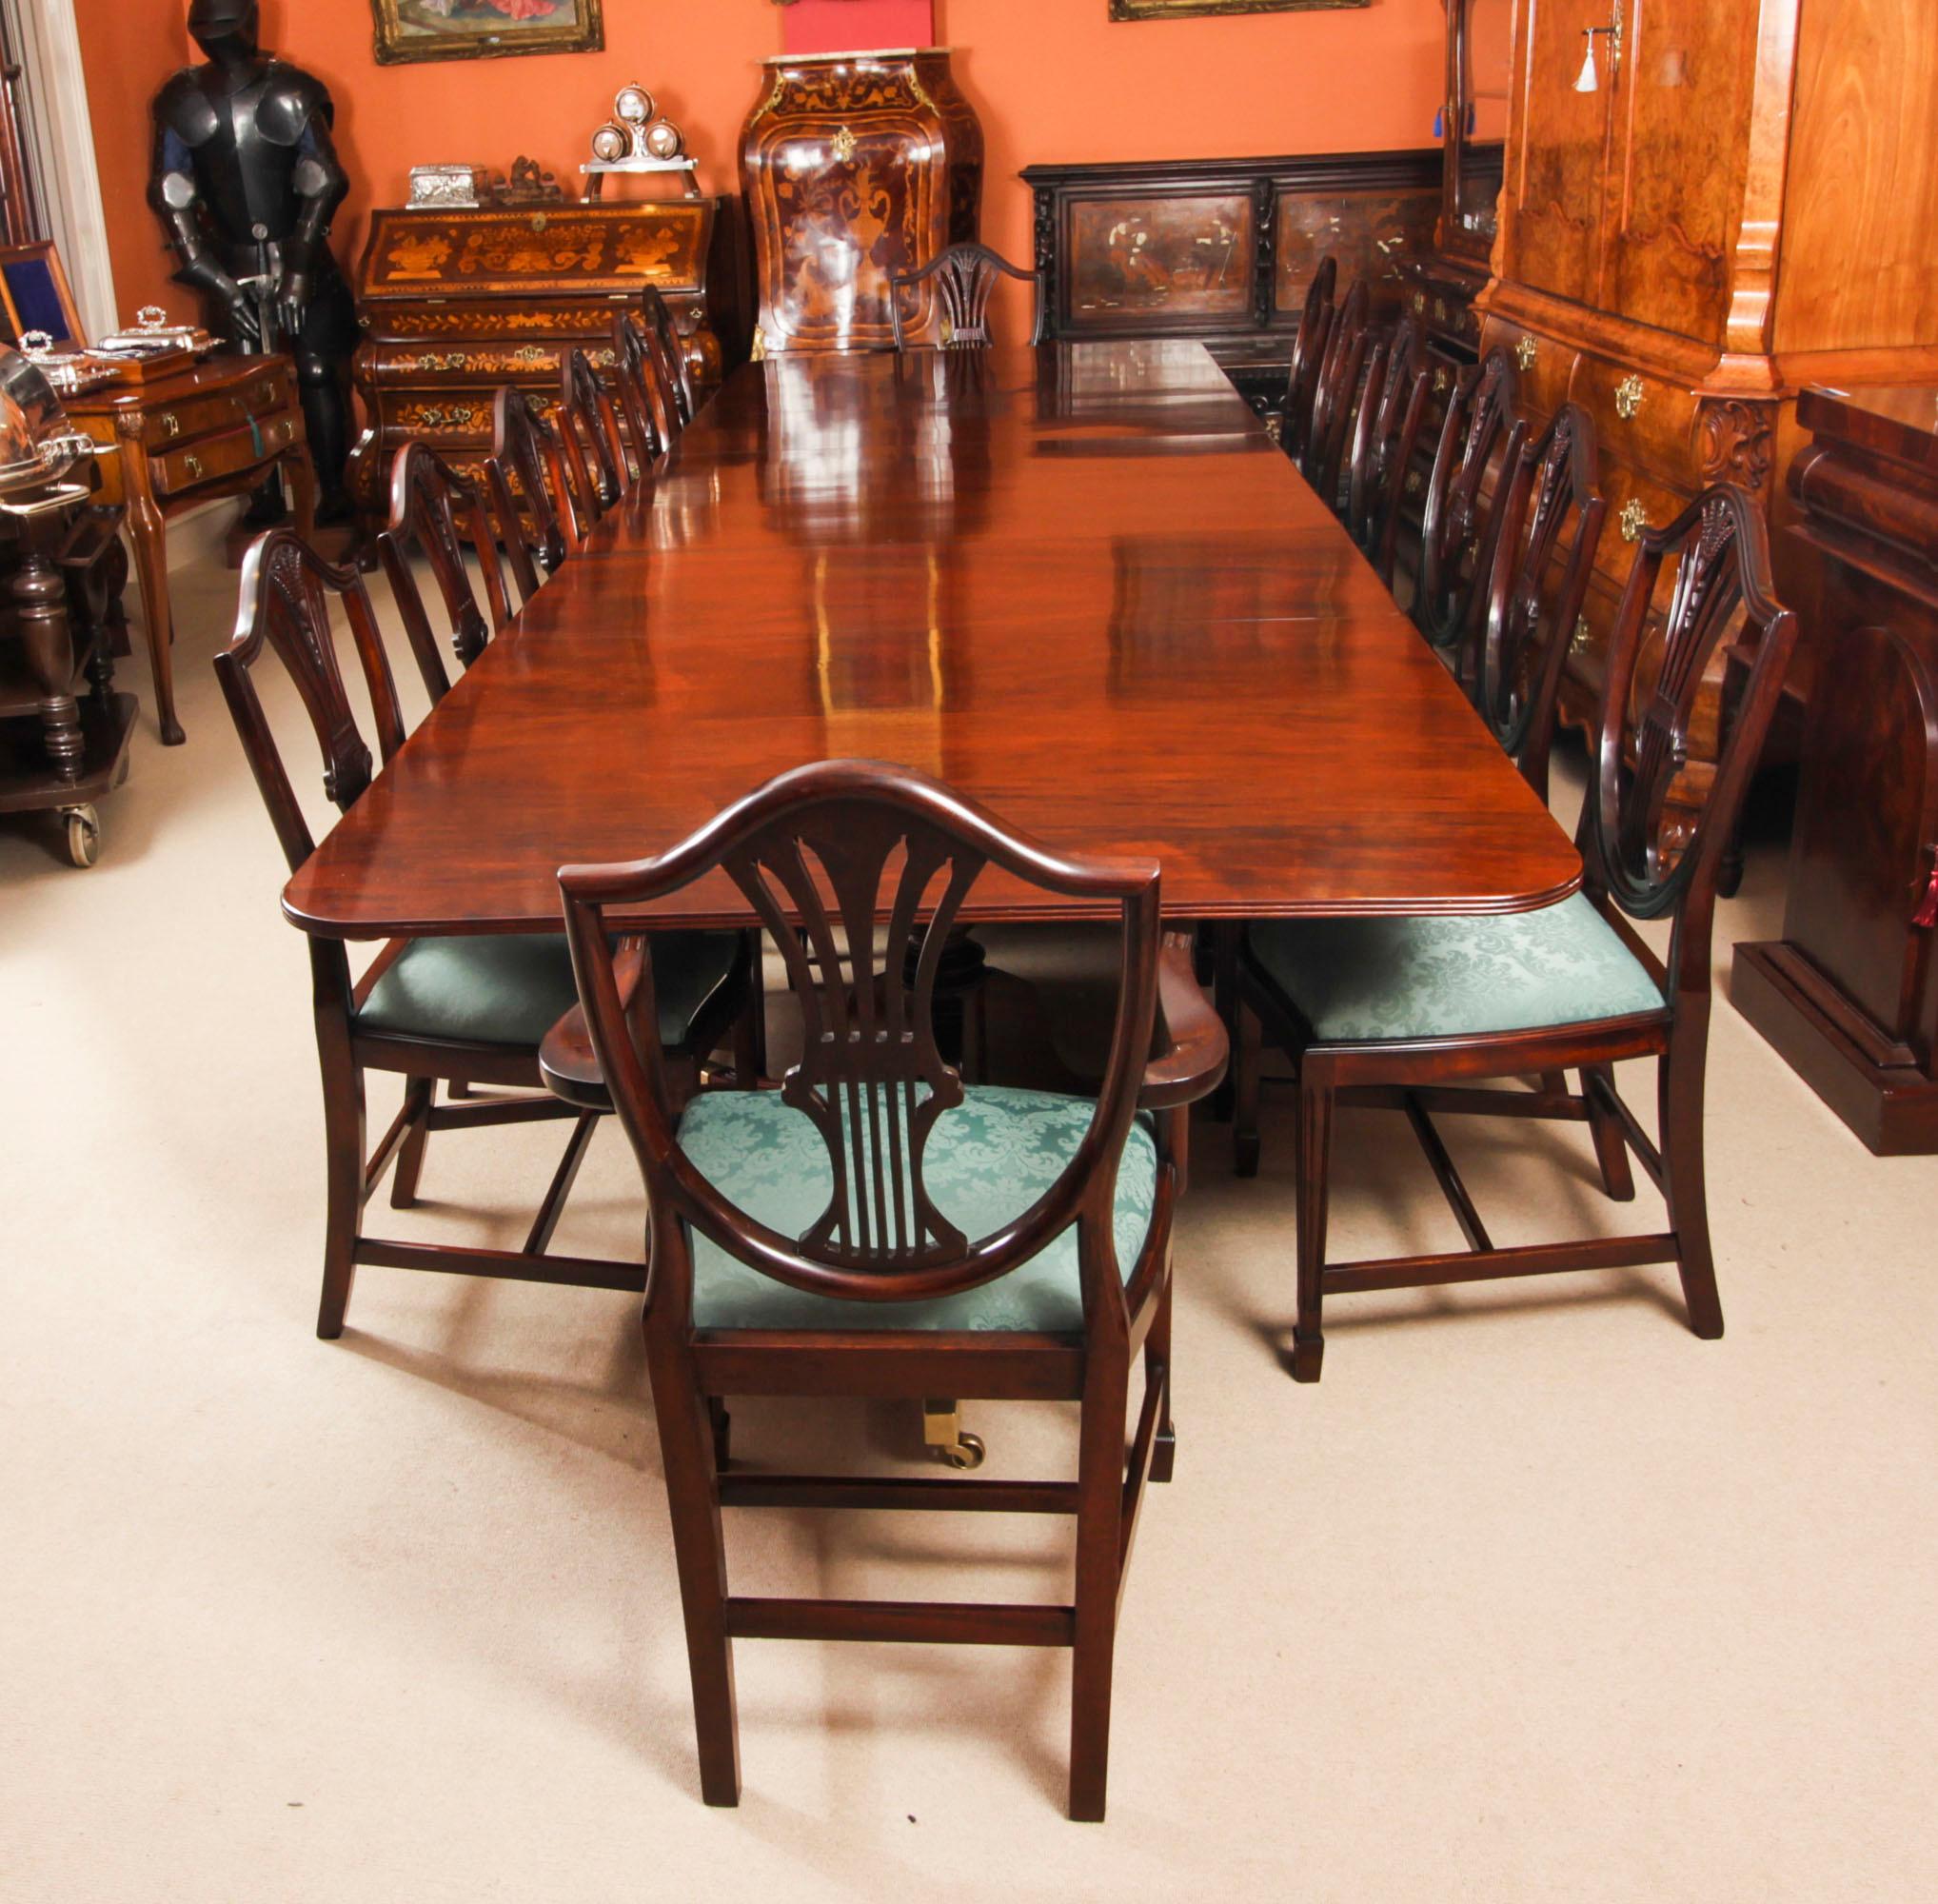 This is an elegant antique Regency Revival dining table, 19th Century in date and fourteen mid-century  wheatsheaf shieldback dining chairs.

The table has two leaves which can be added or removed as required to suit the occasion and it stands on